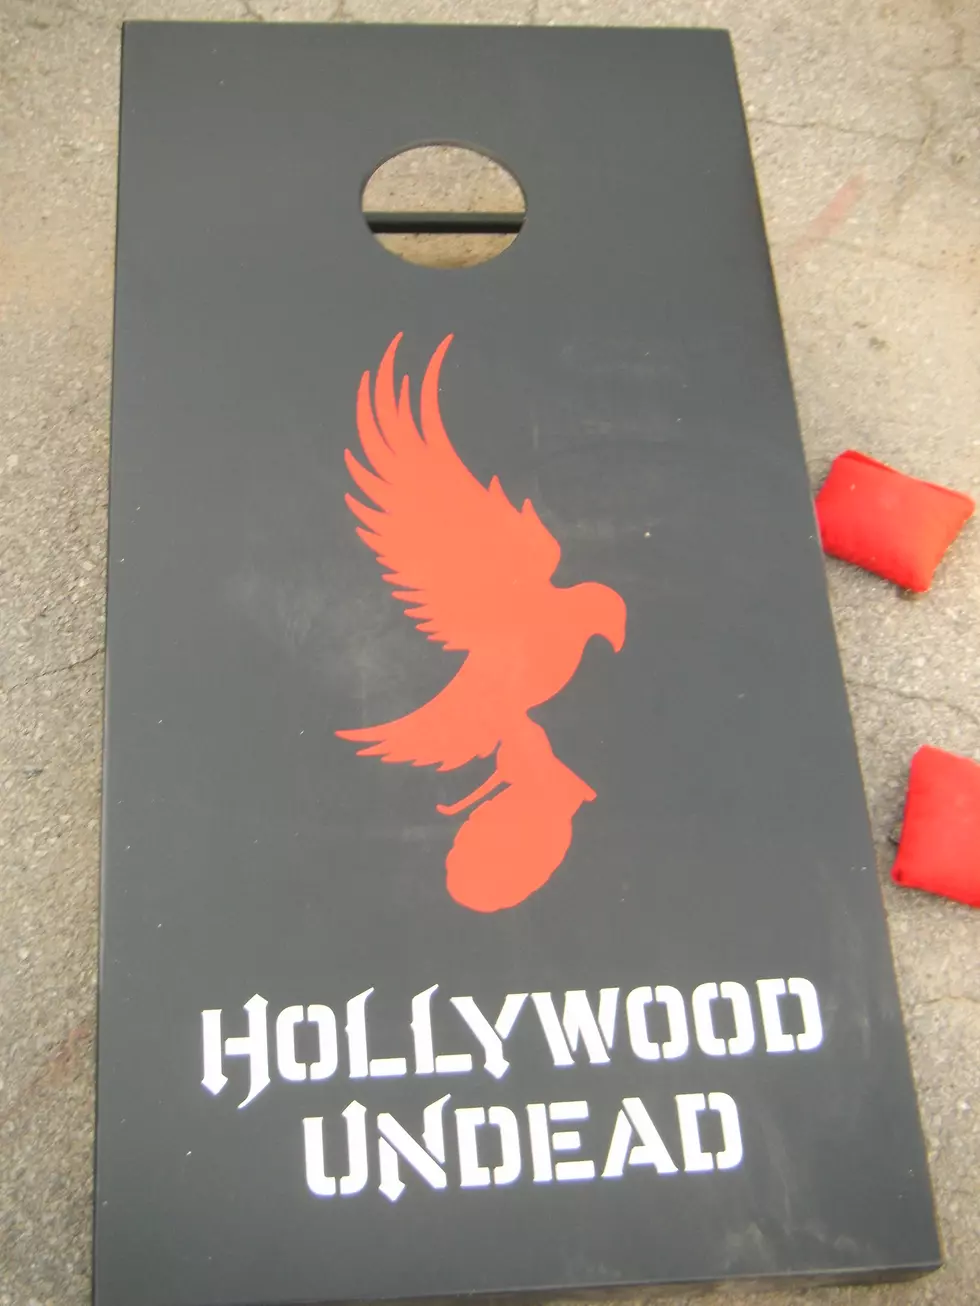 Winners Get Cornhole’d With Hollywood Undead! [Photos]